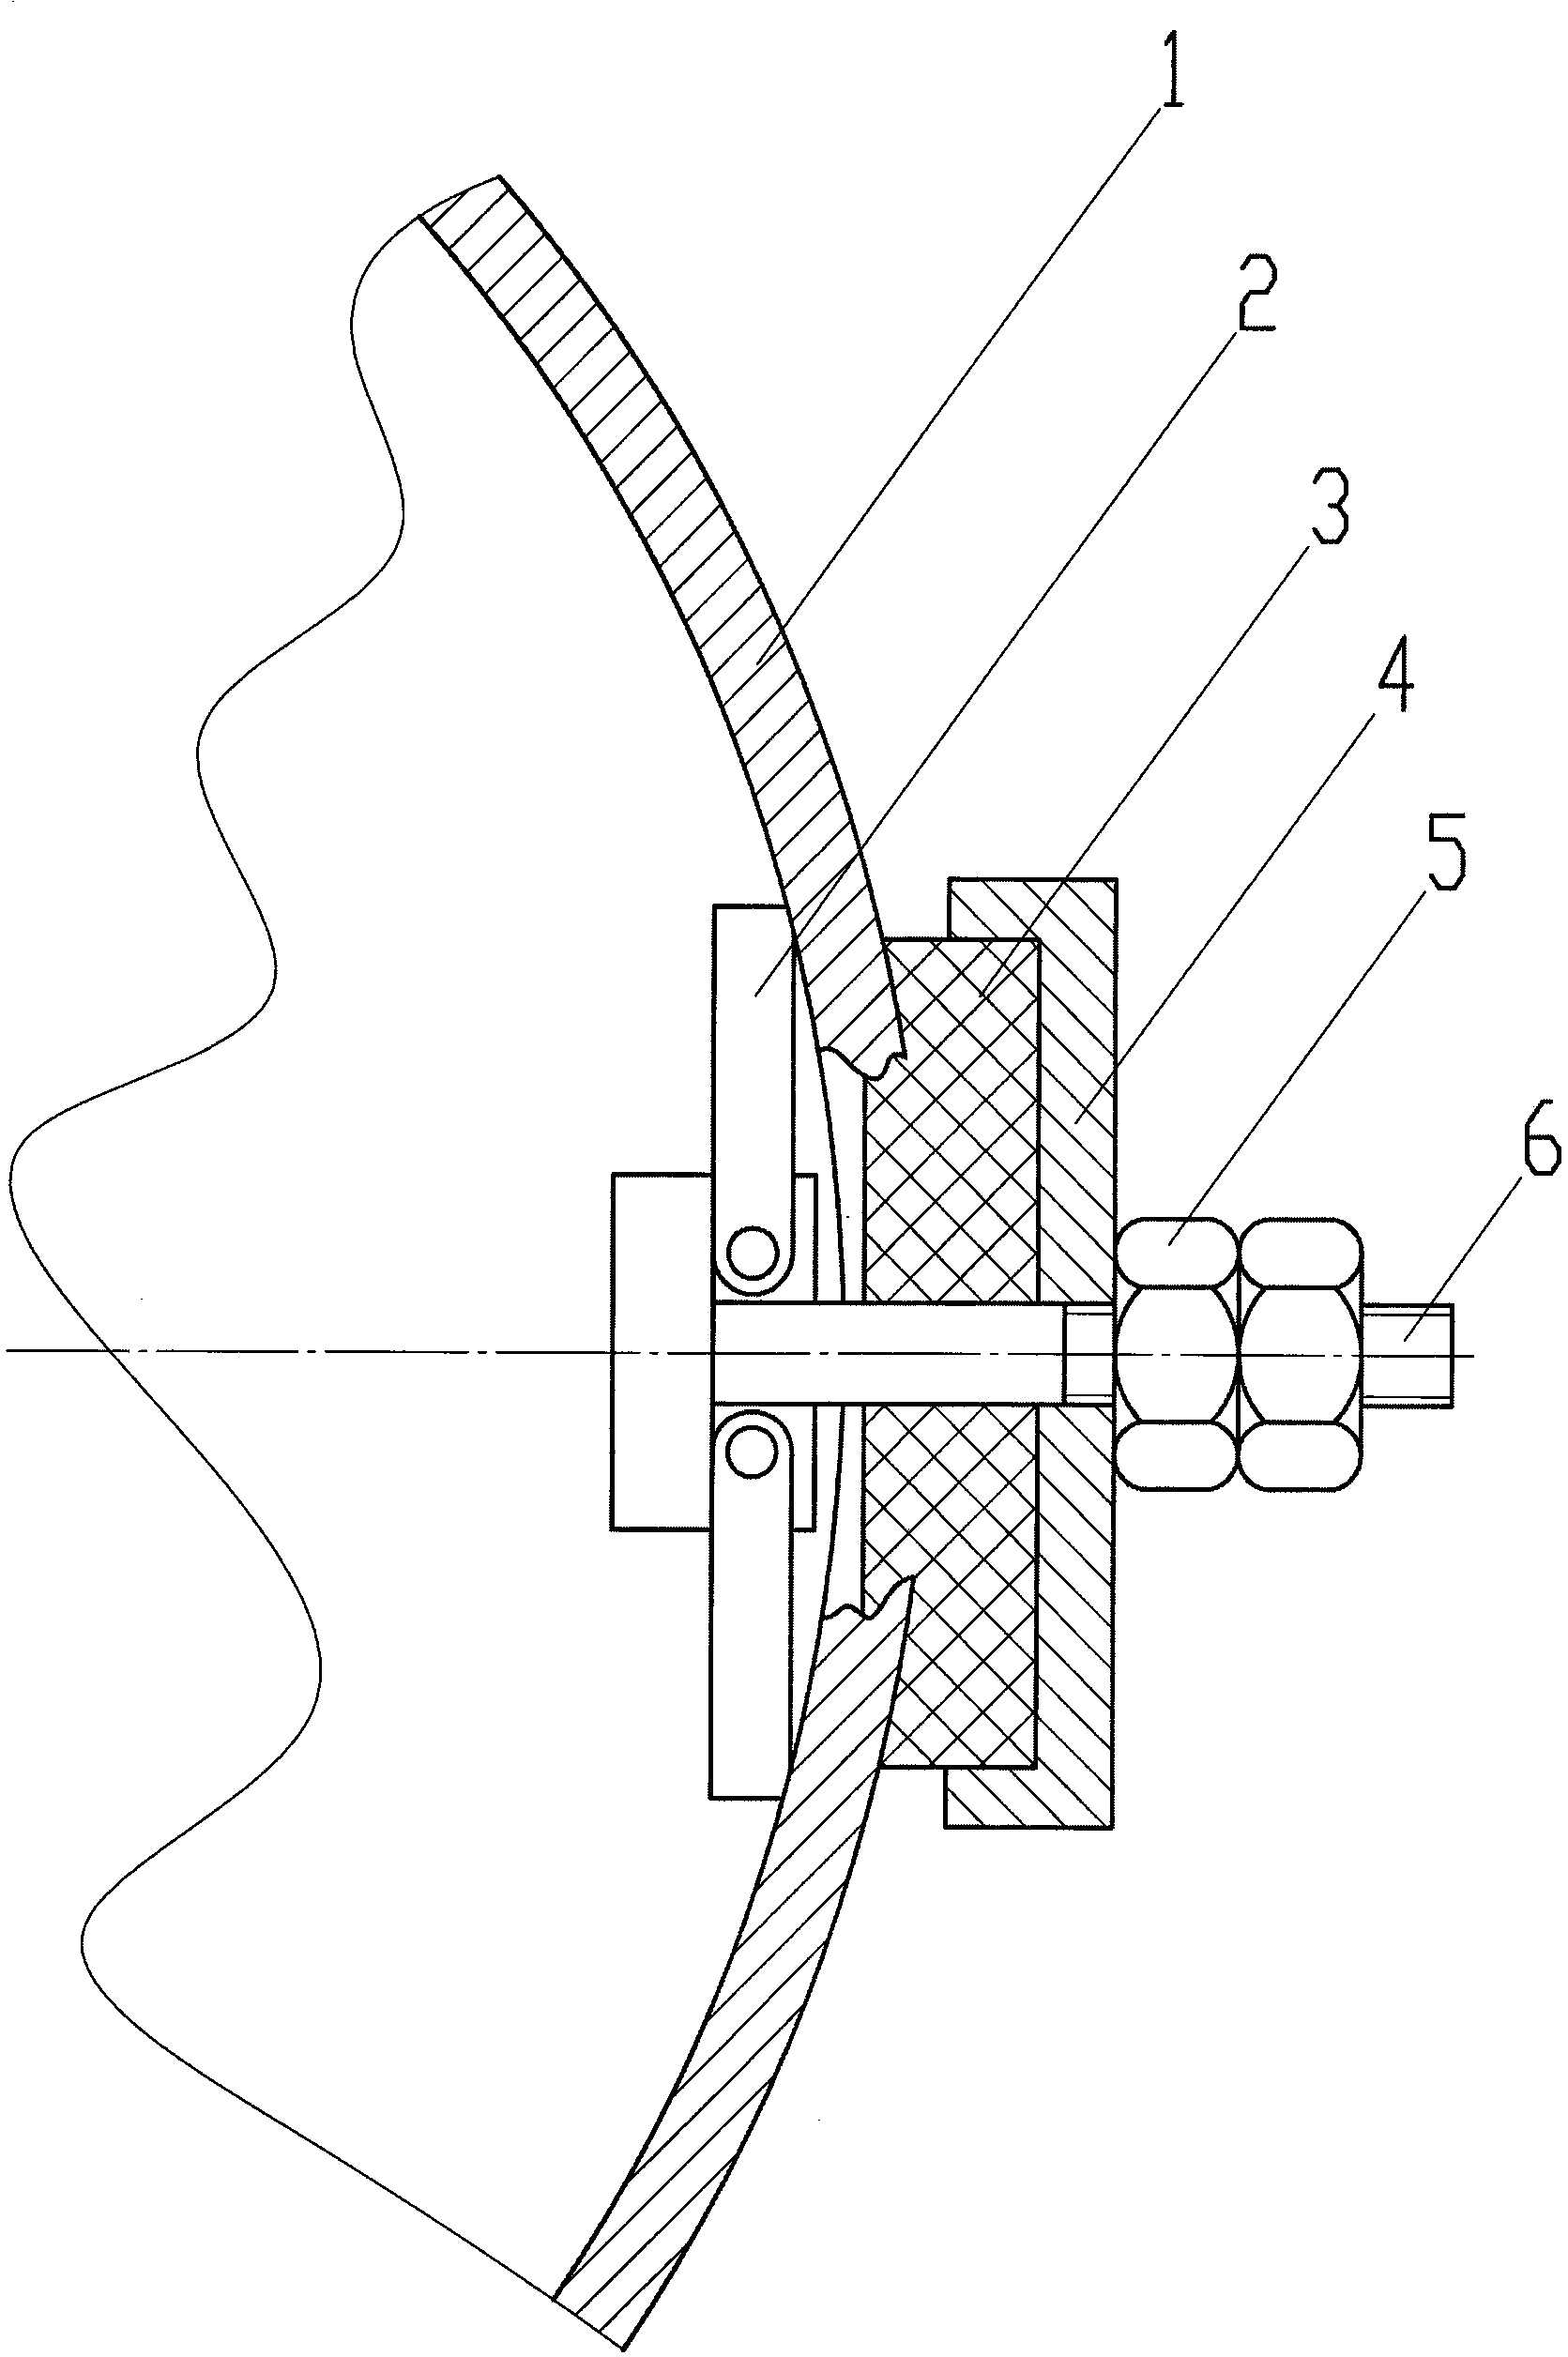 Wall-mounted leaking stoppage device